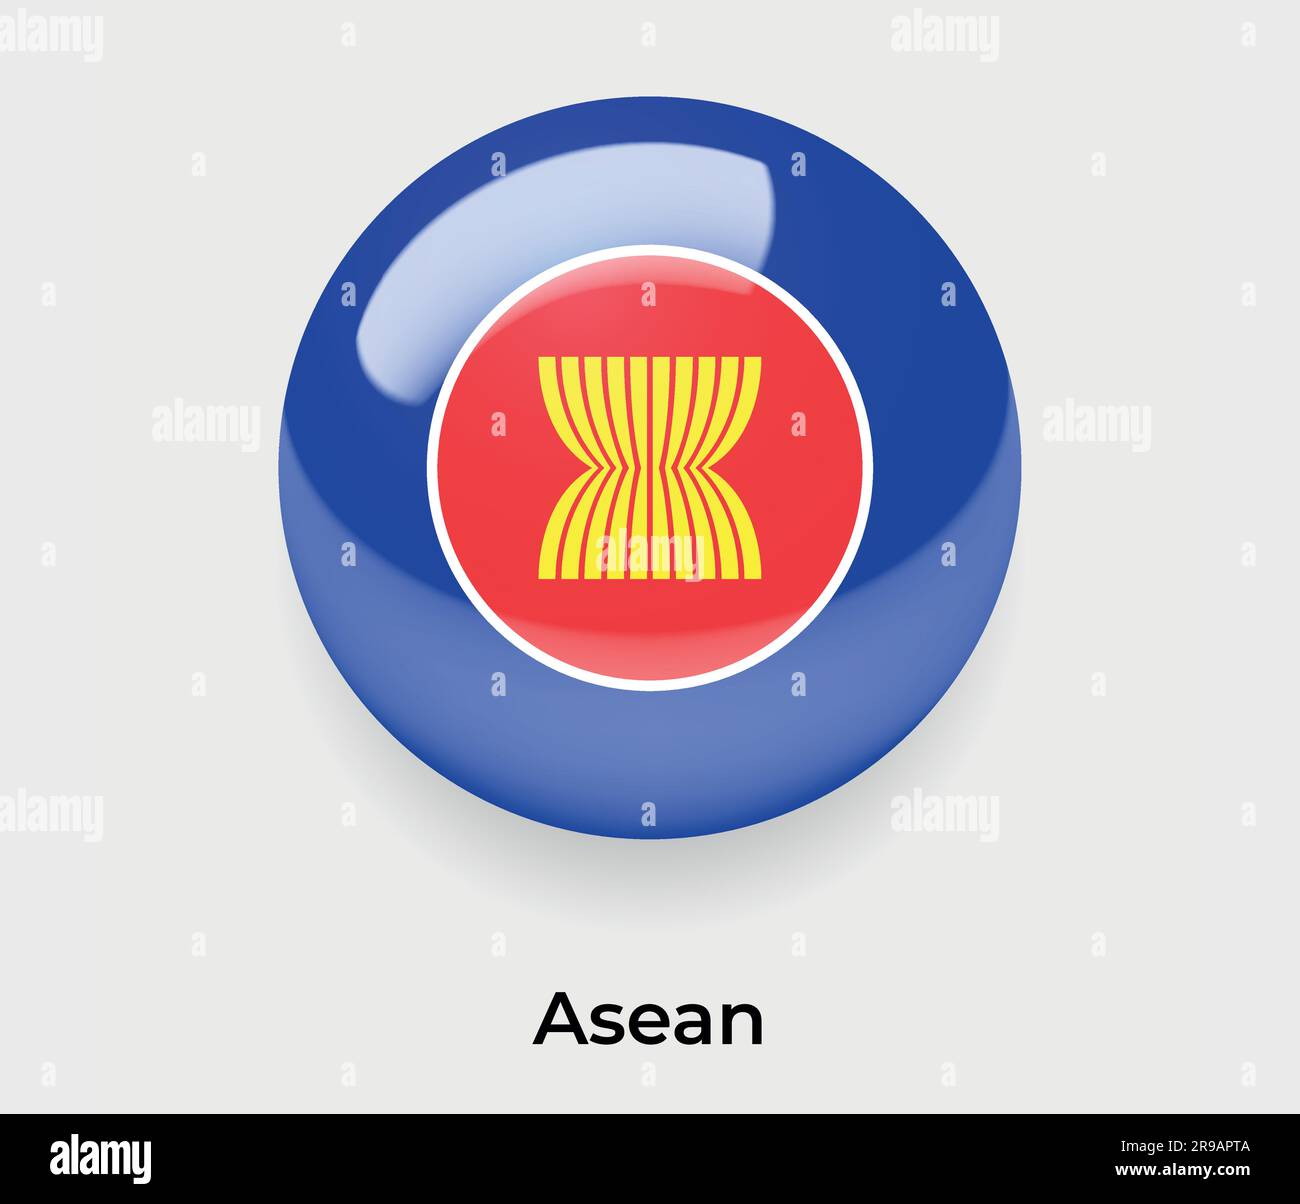 Asean glossy flag bubble circle round shape icon vector illustration glass Stock Vector